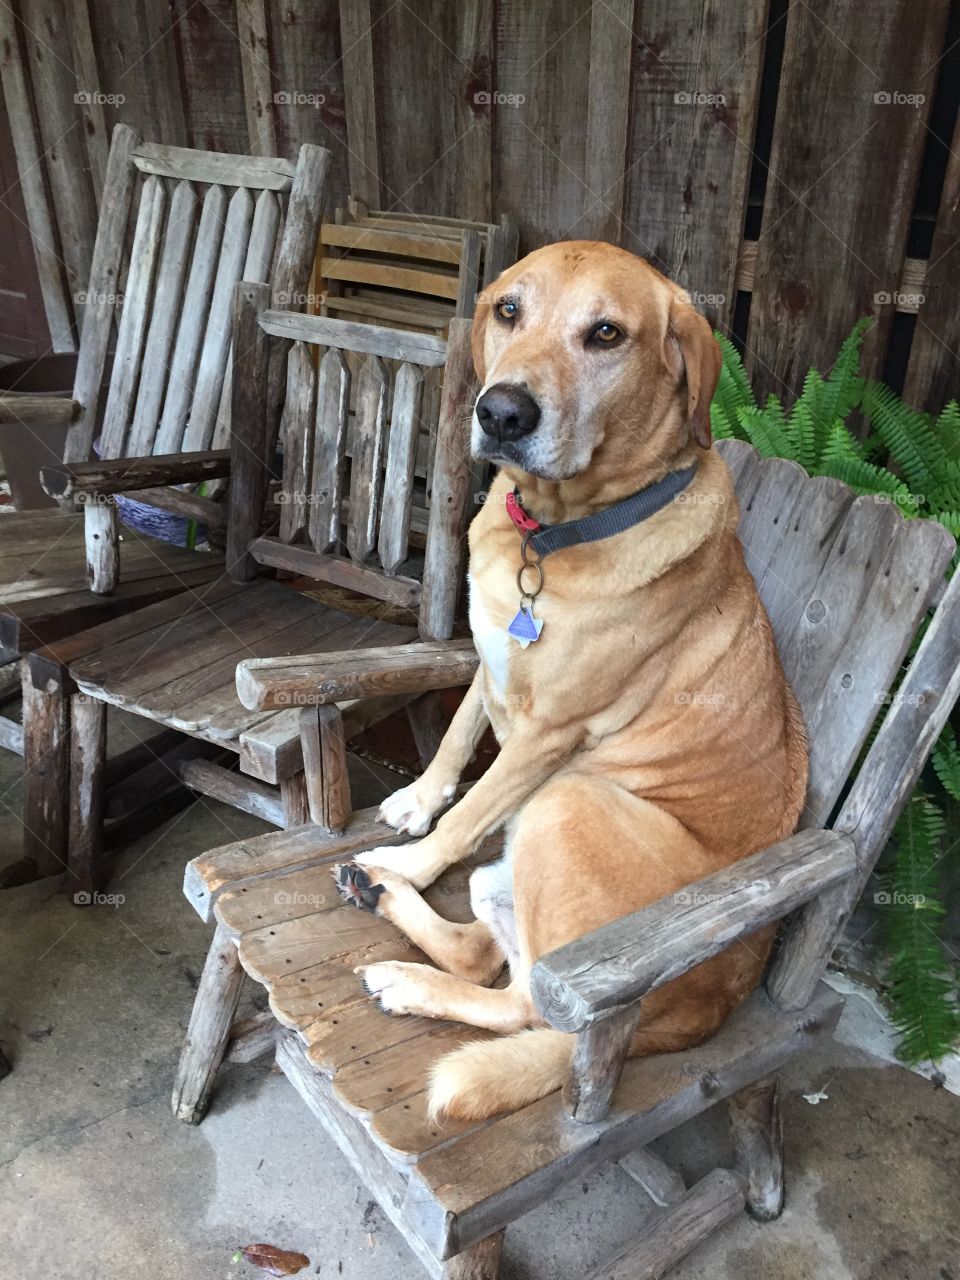 Bud the dog on his throne 